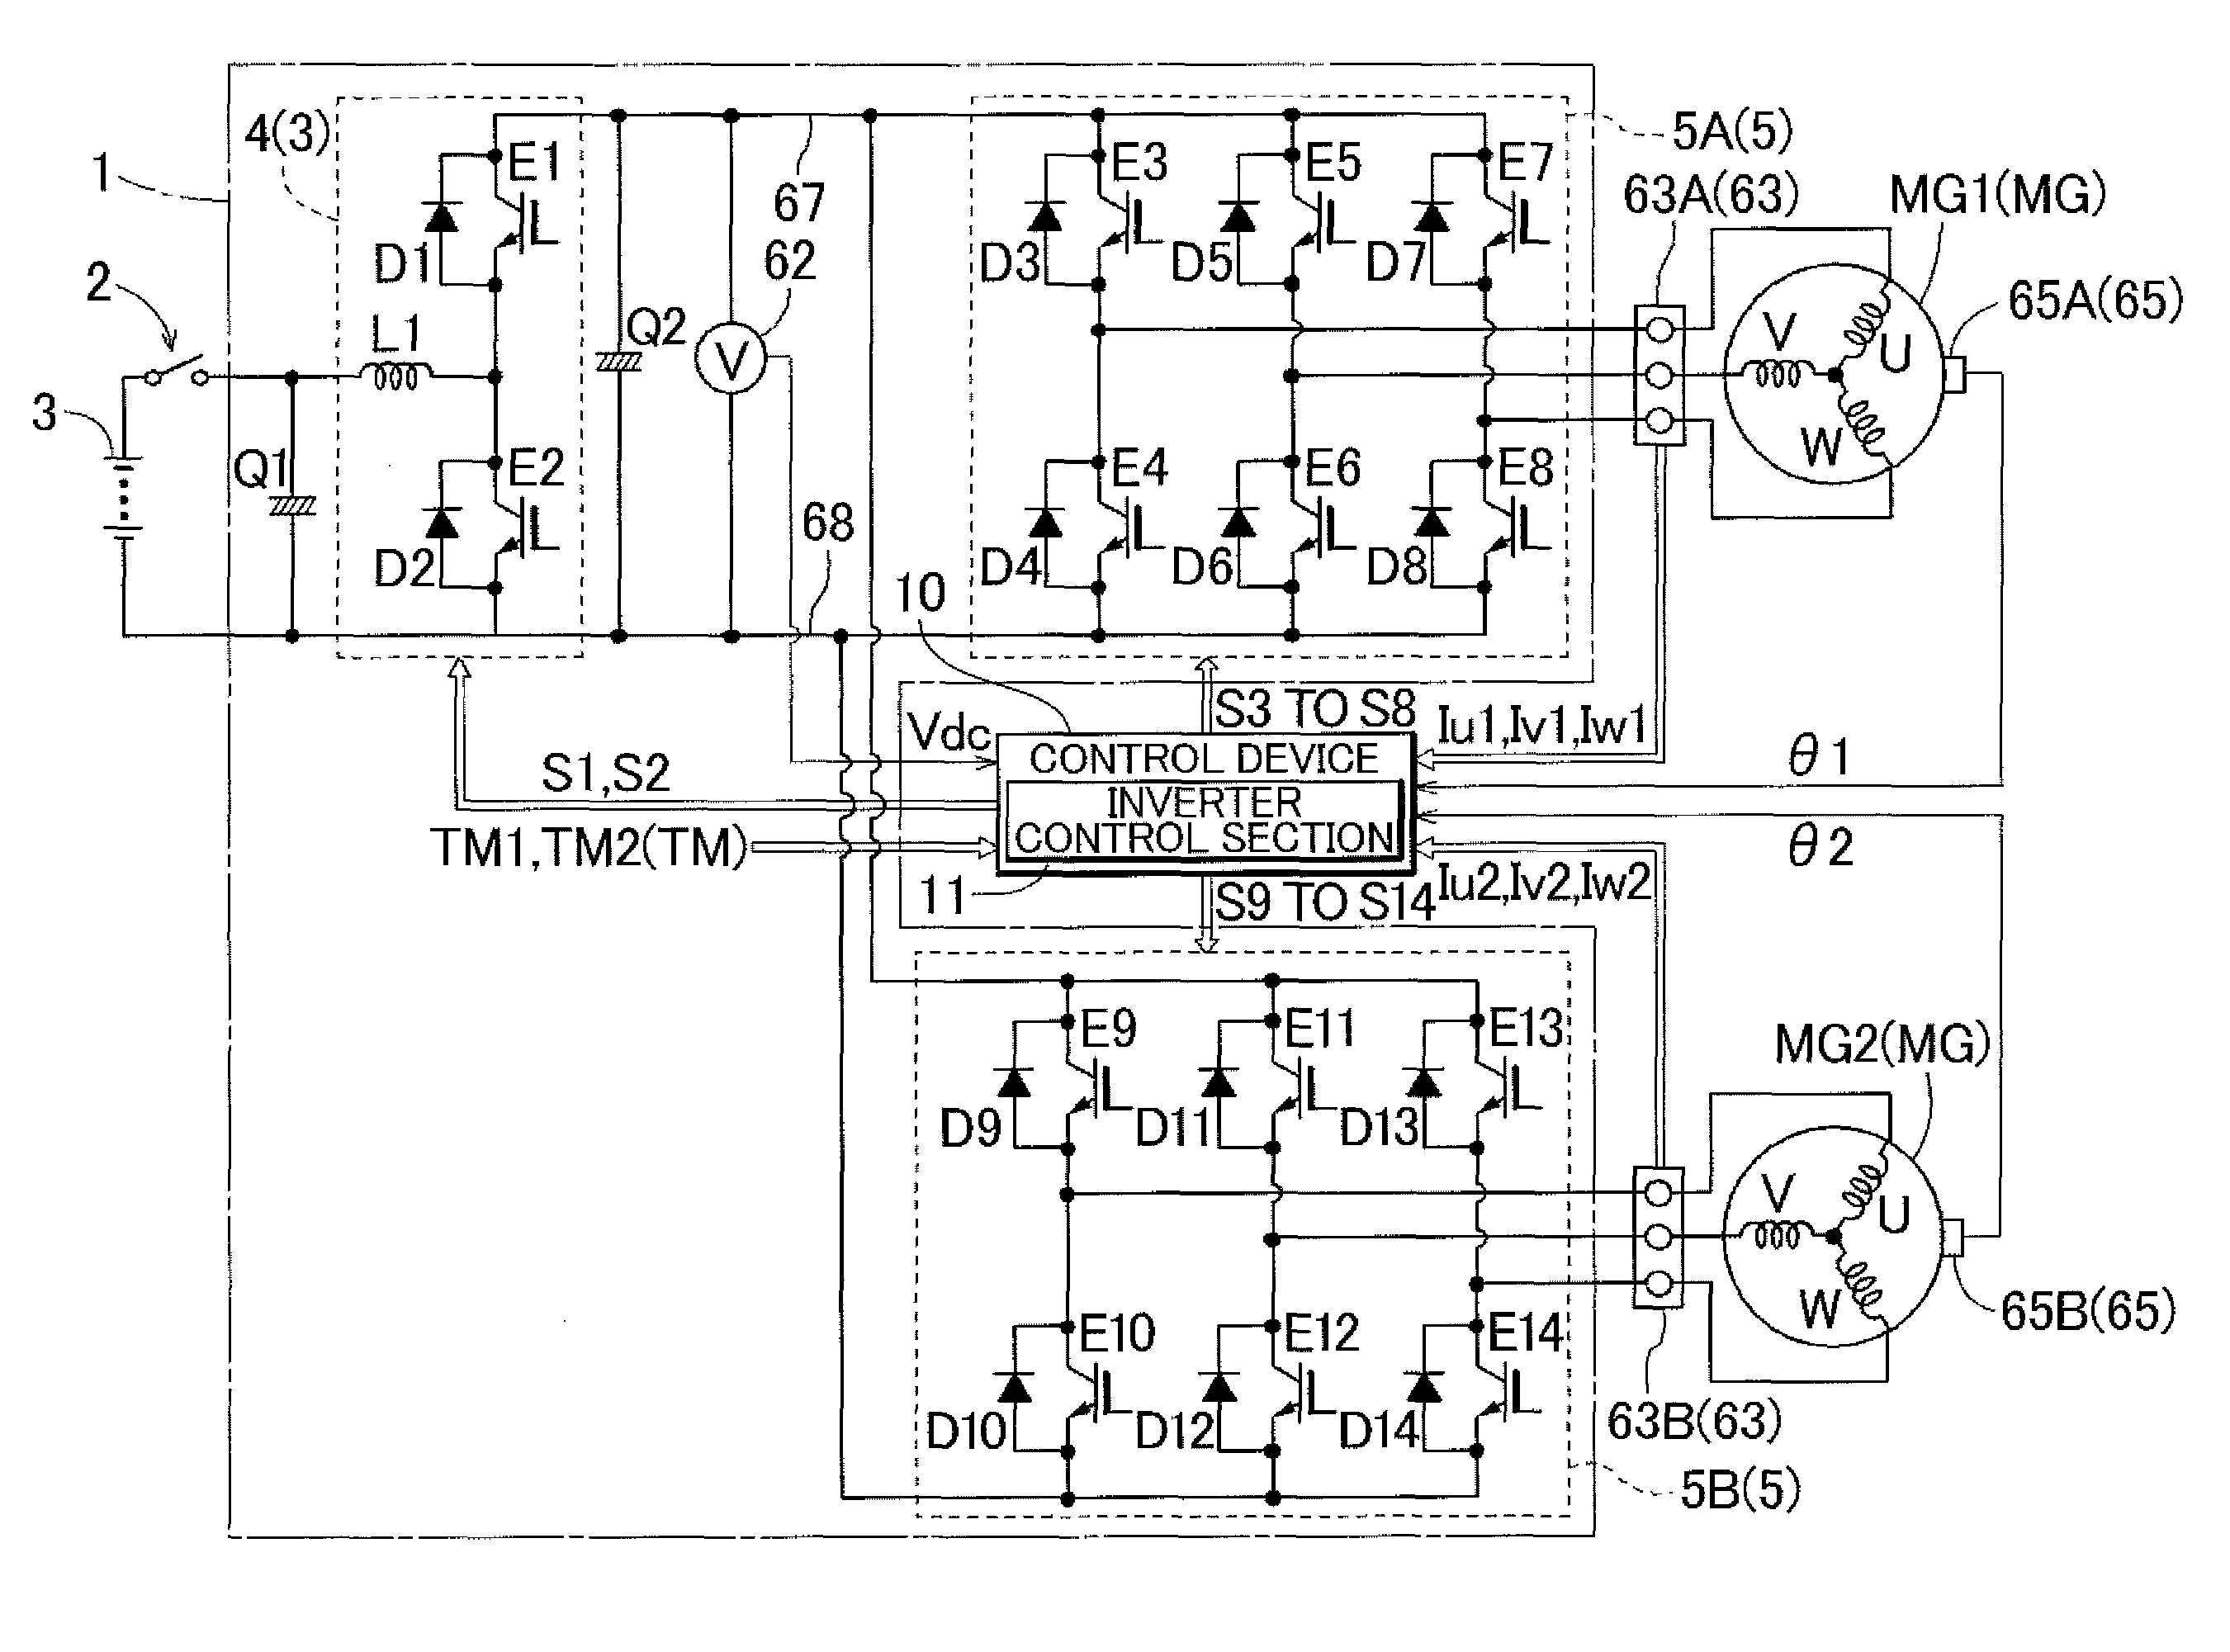 Rotary electrical machine control device